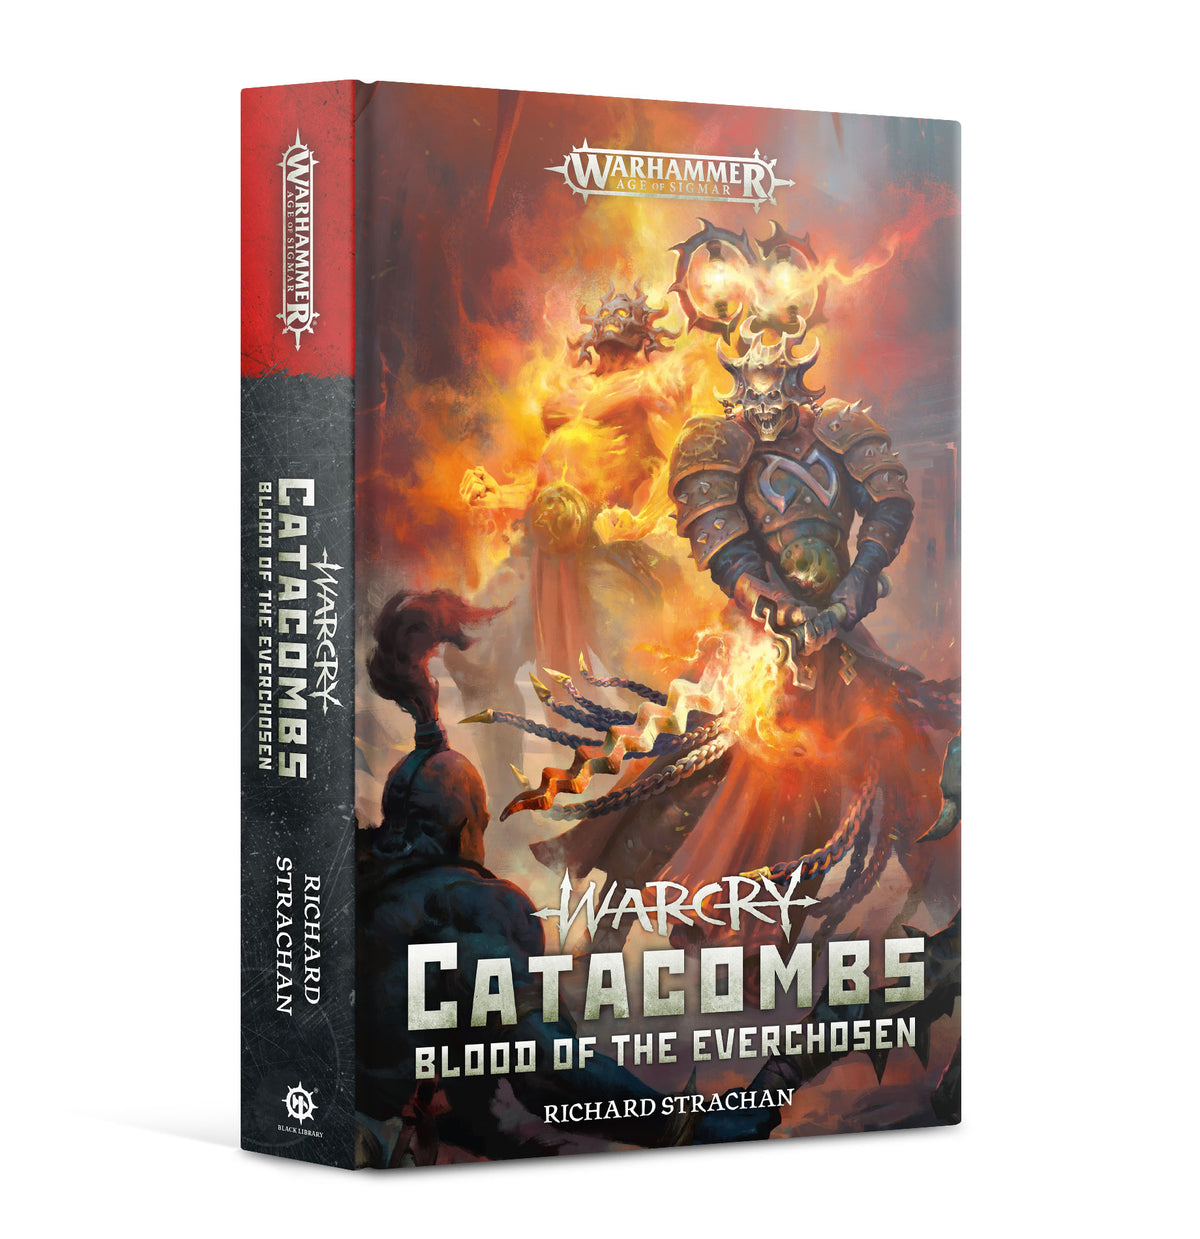 Warcry Catacombs: Blood of the Everchosen (Novel HB)